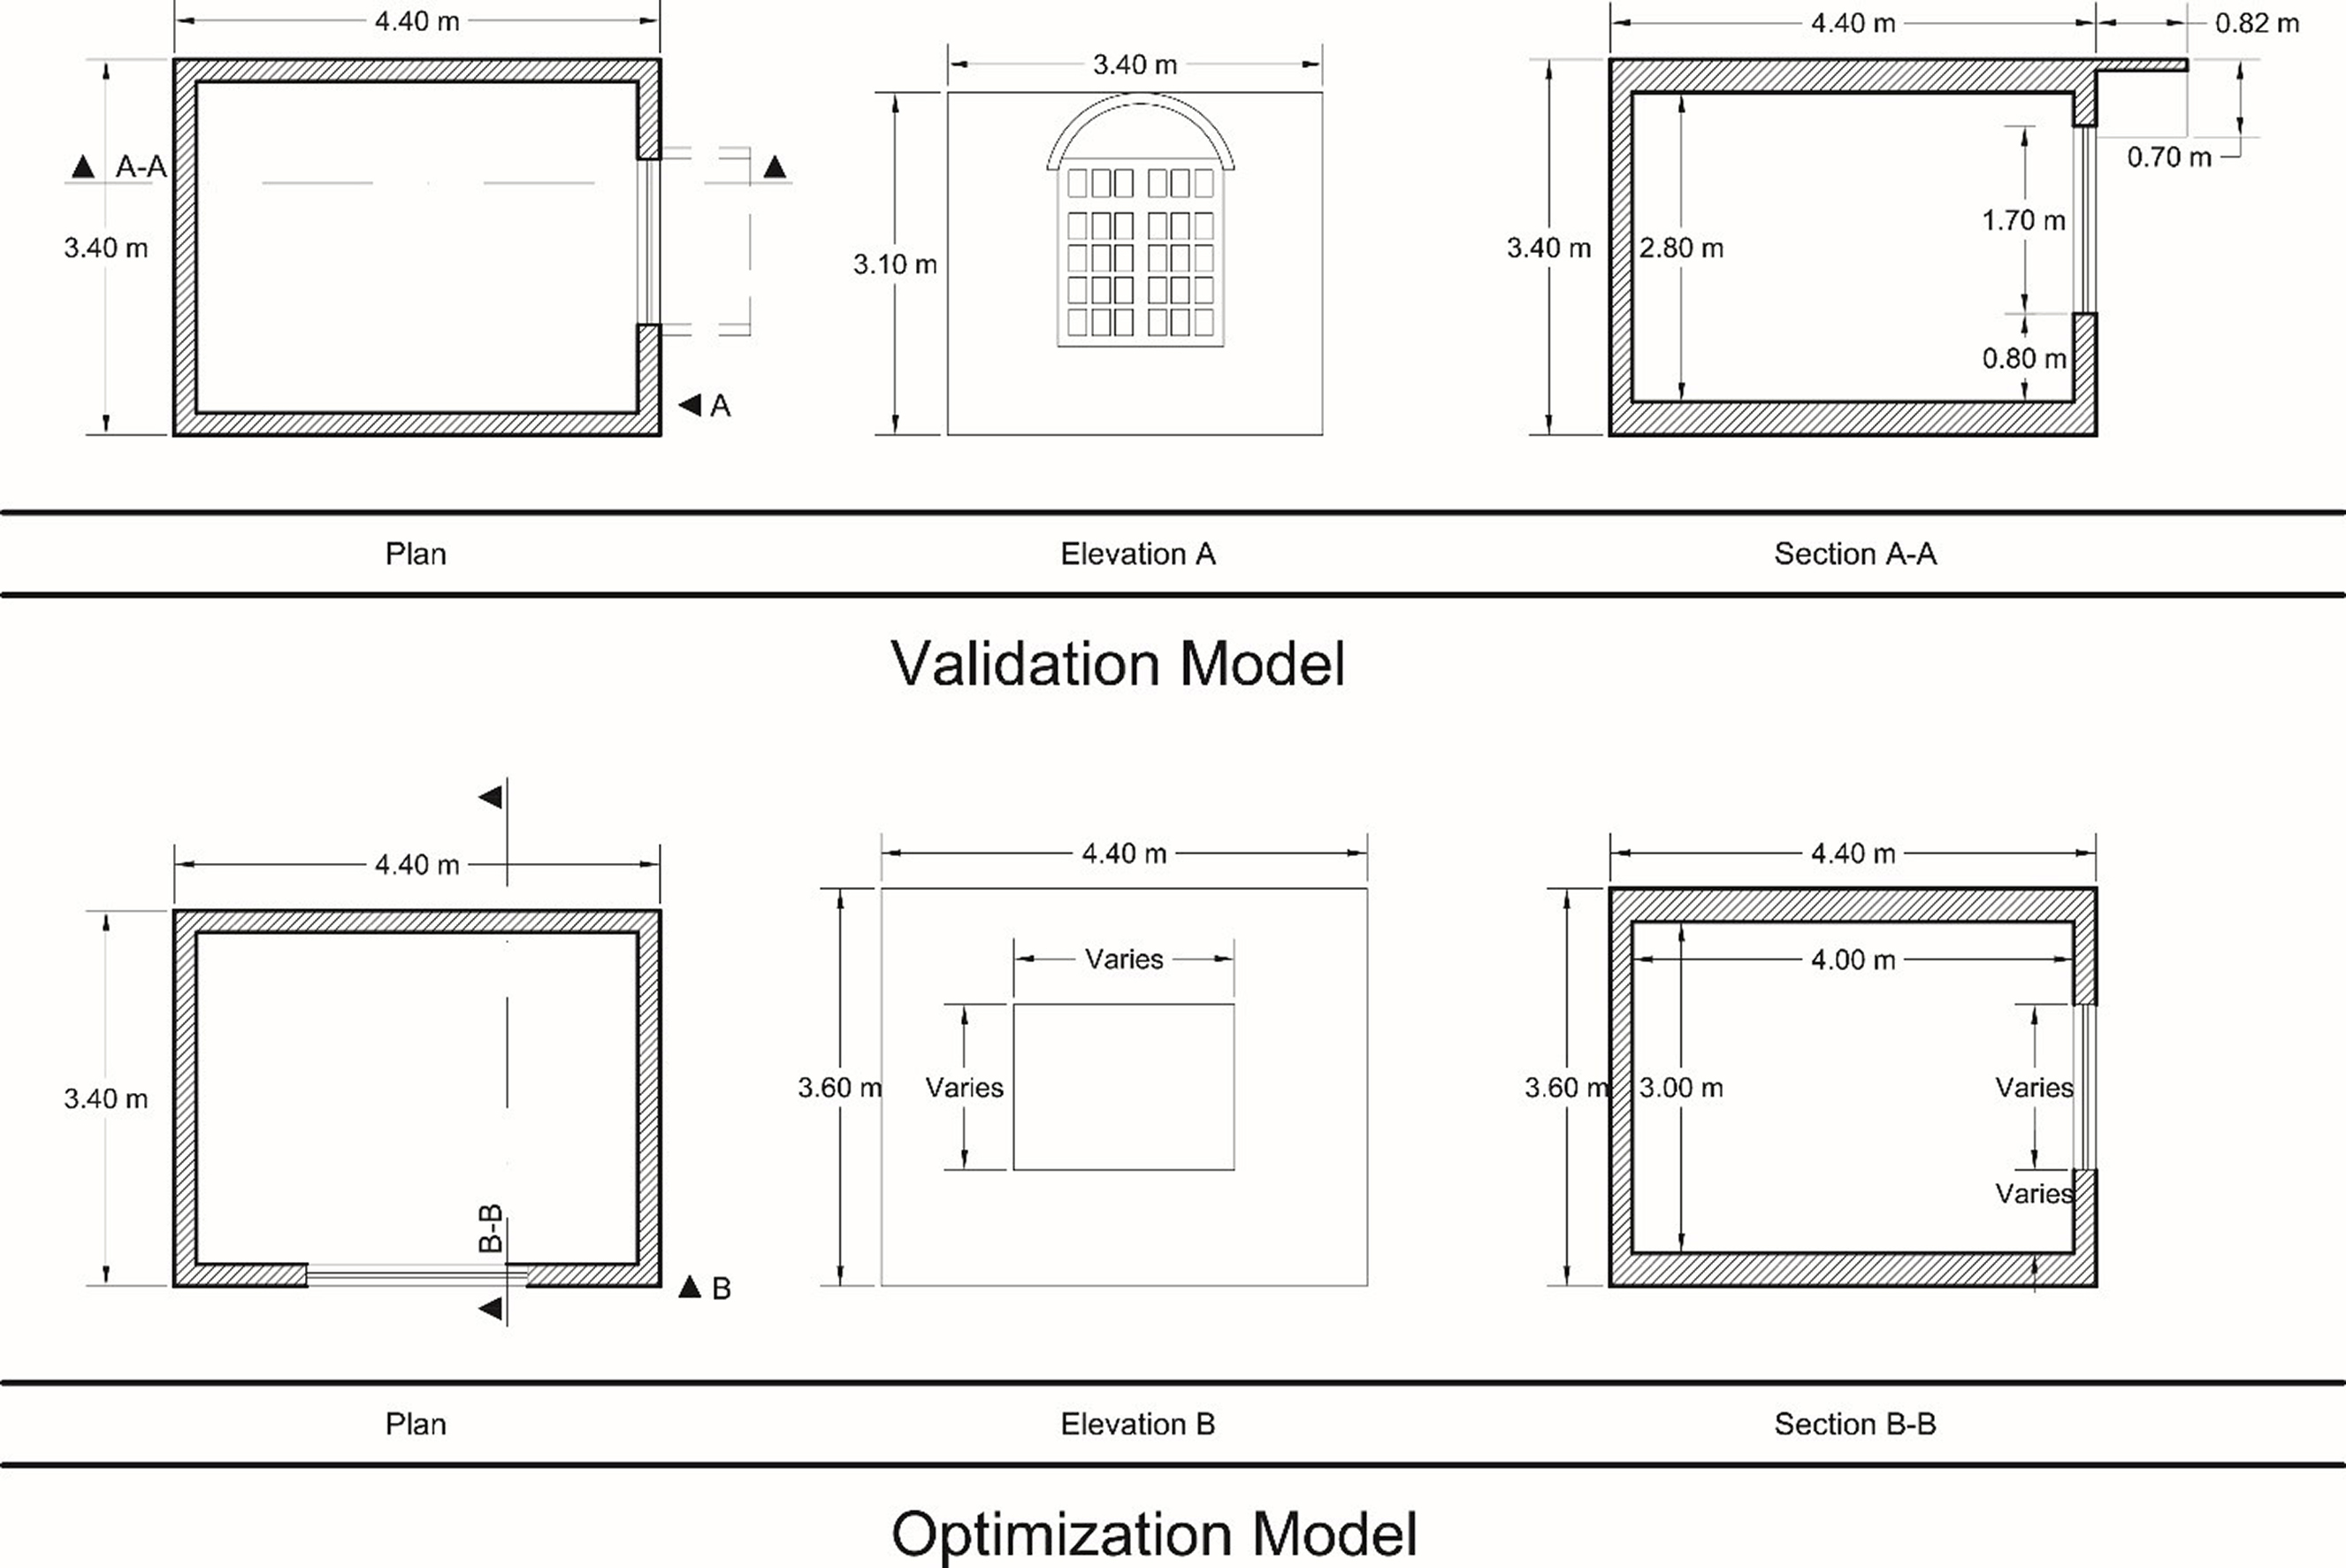 The interior dimensions of the validation and optimization models.